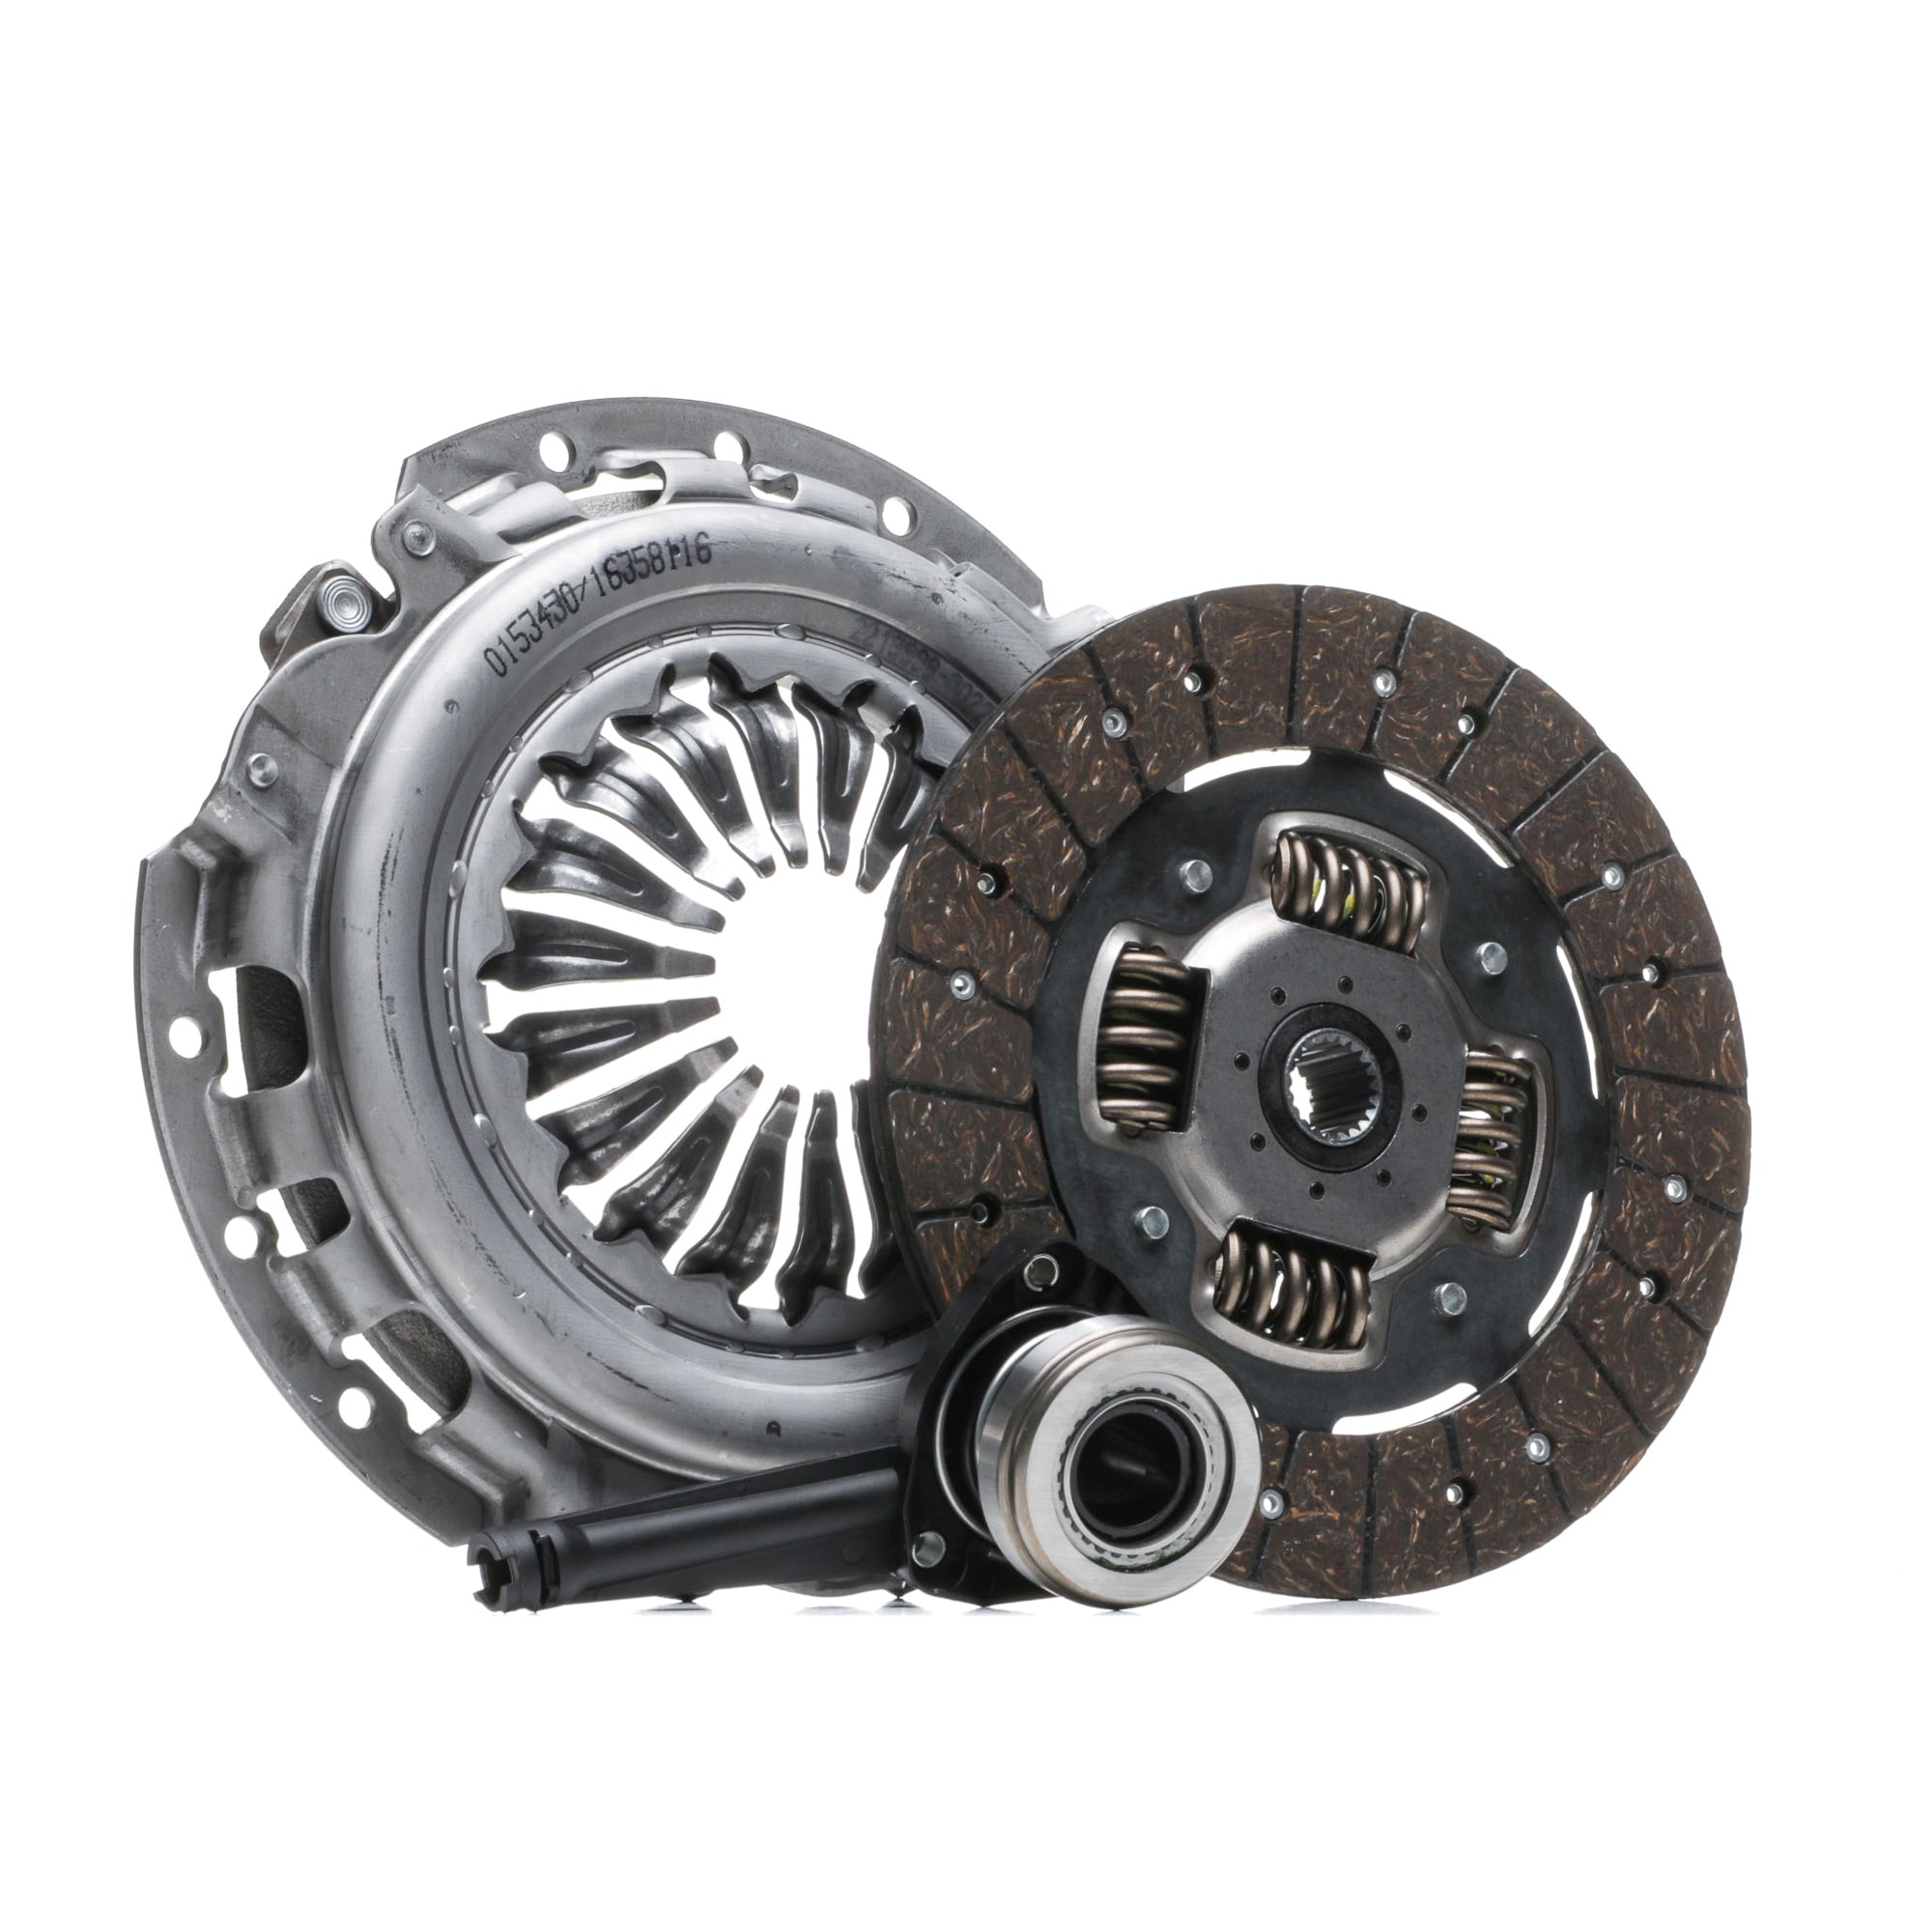 STARK SKCK-0101542 Clutch kit RENAULT experience and price